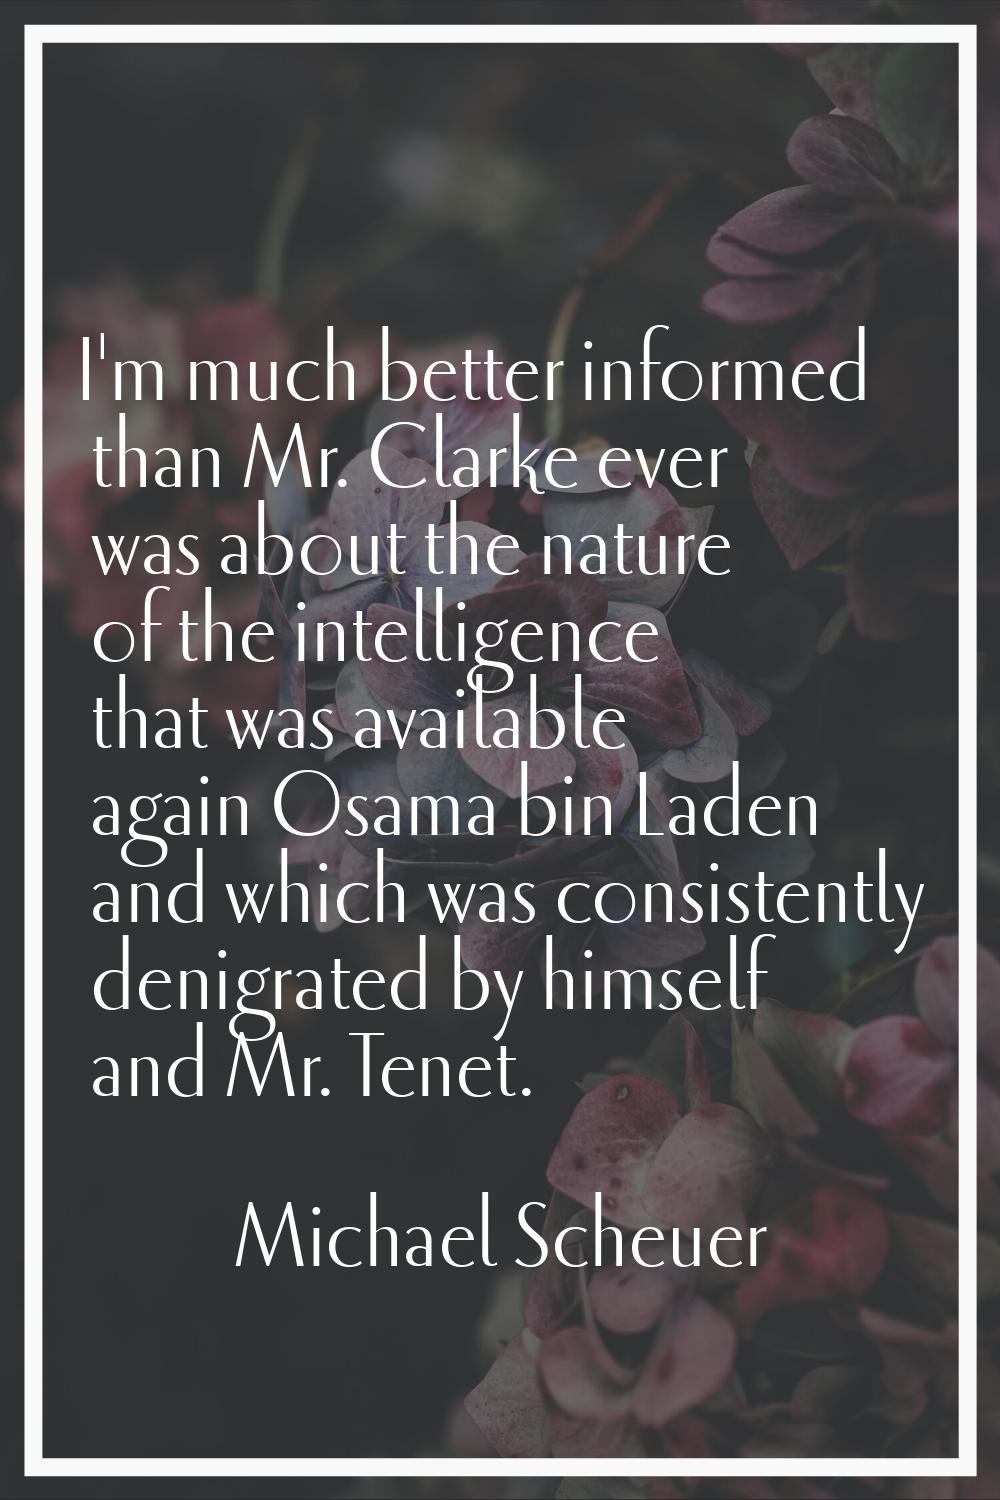 I'm much better informed than Mr. Clarke ever was about the nature of the intelligence that was ava